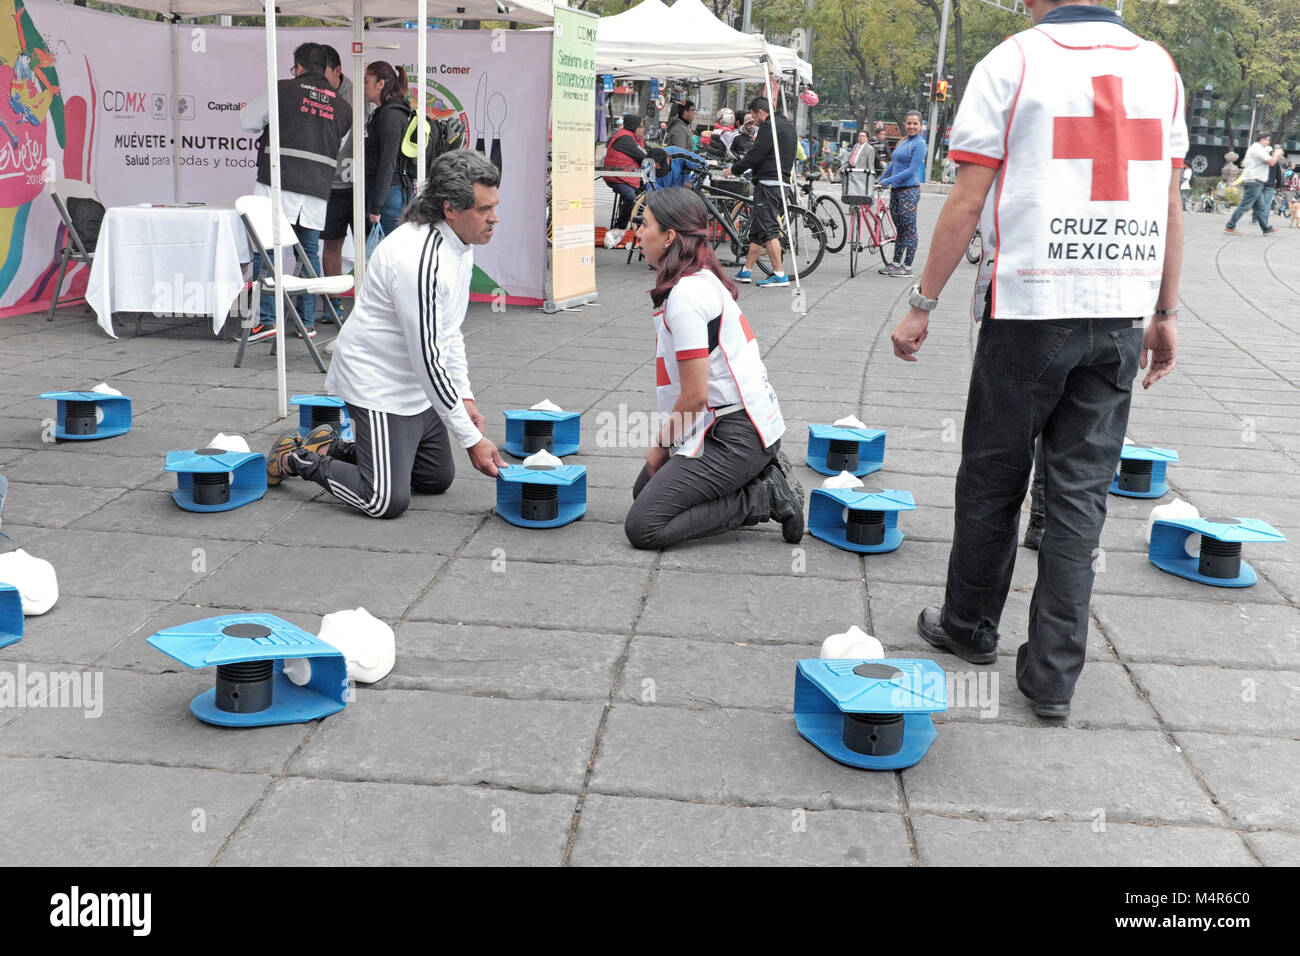 Cruz Roja Mexicana volunteers demonstrate CPR for people who are interested in learning the technique at a booth on Paseo de Reforma in Mexico City. Stock Photo